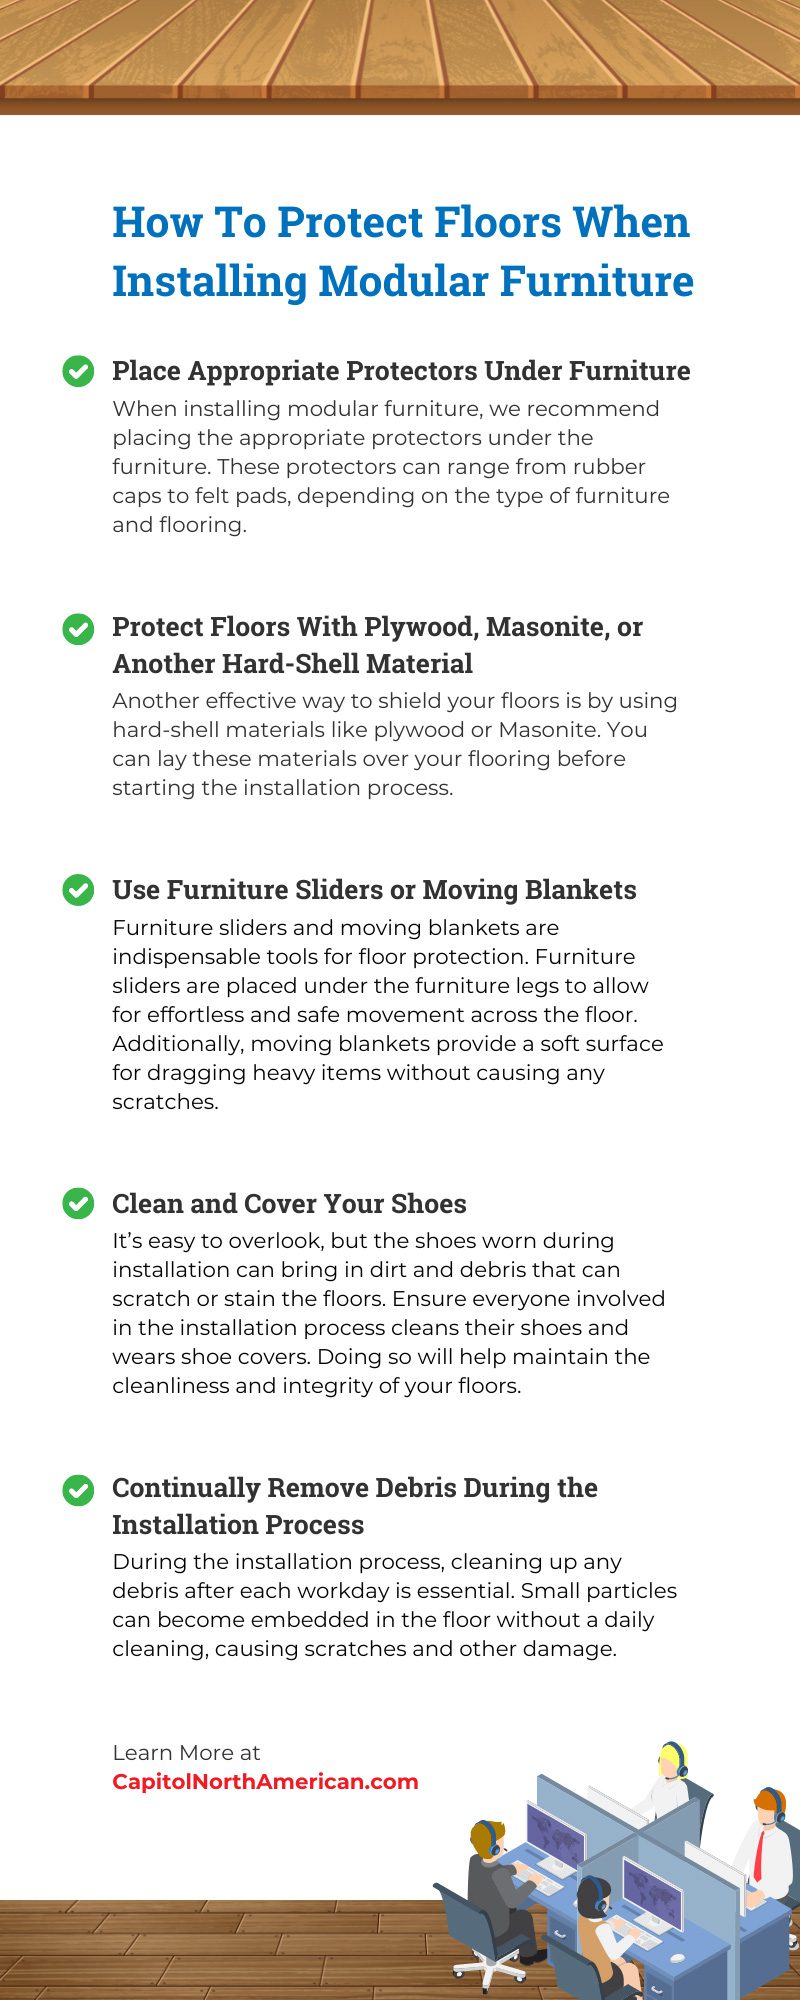 How To Protect Floors When Installing Modular Furniture